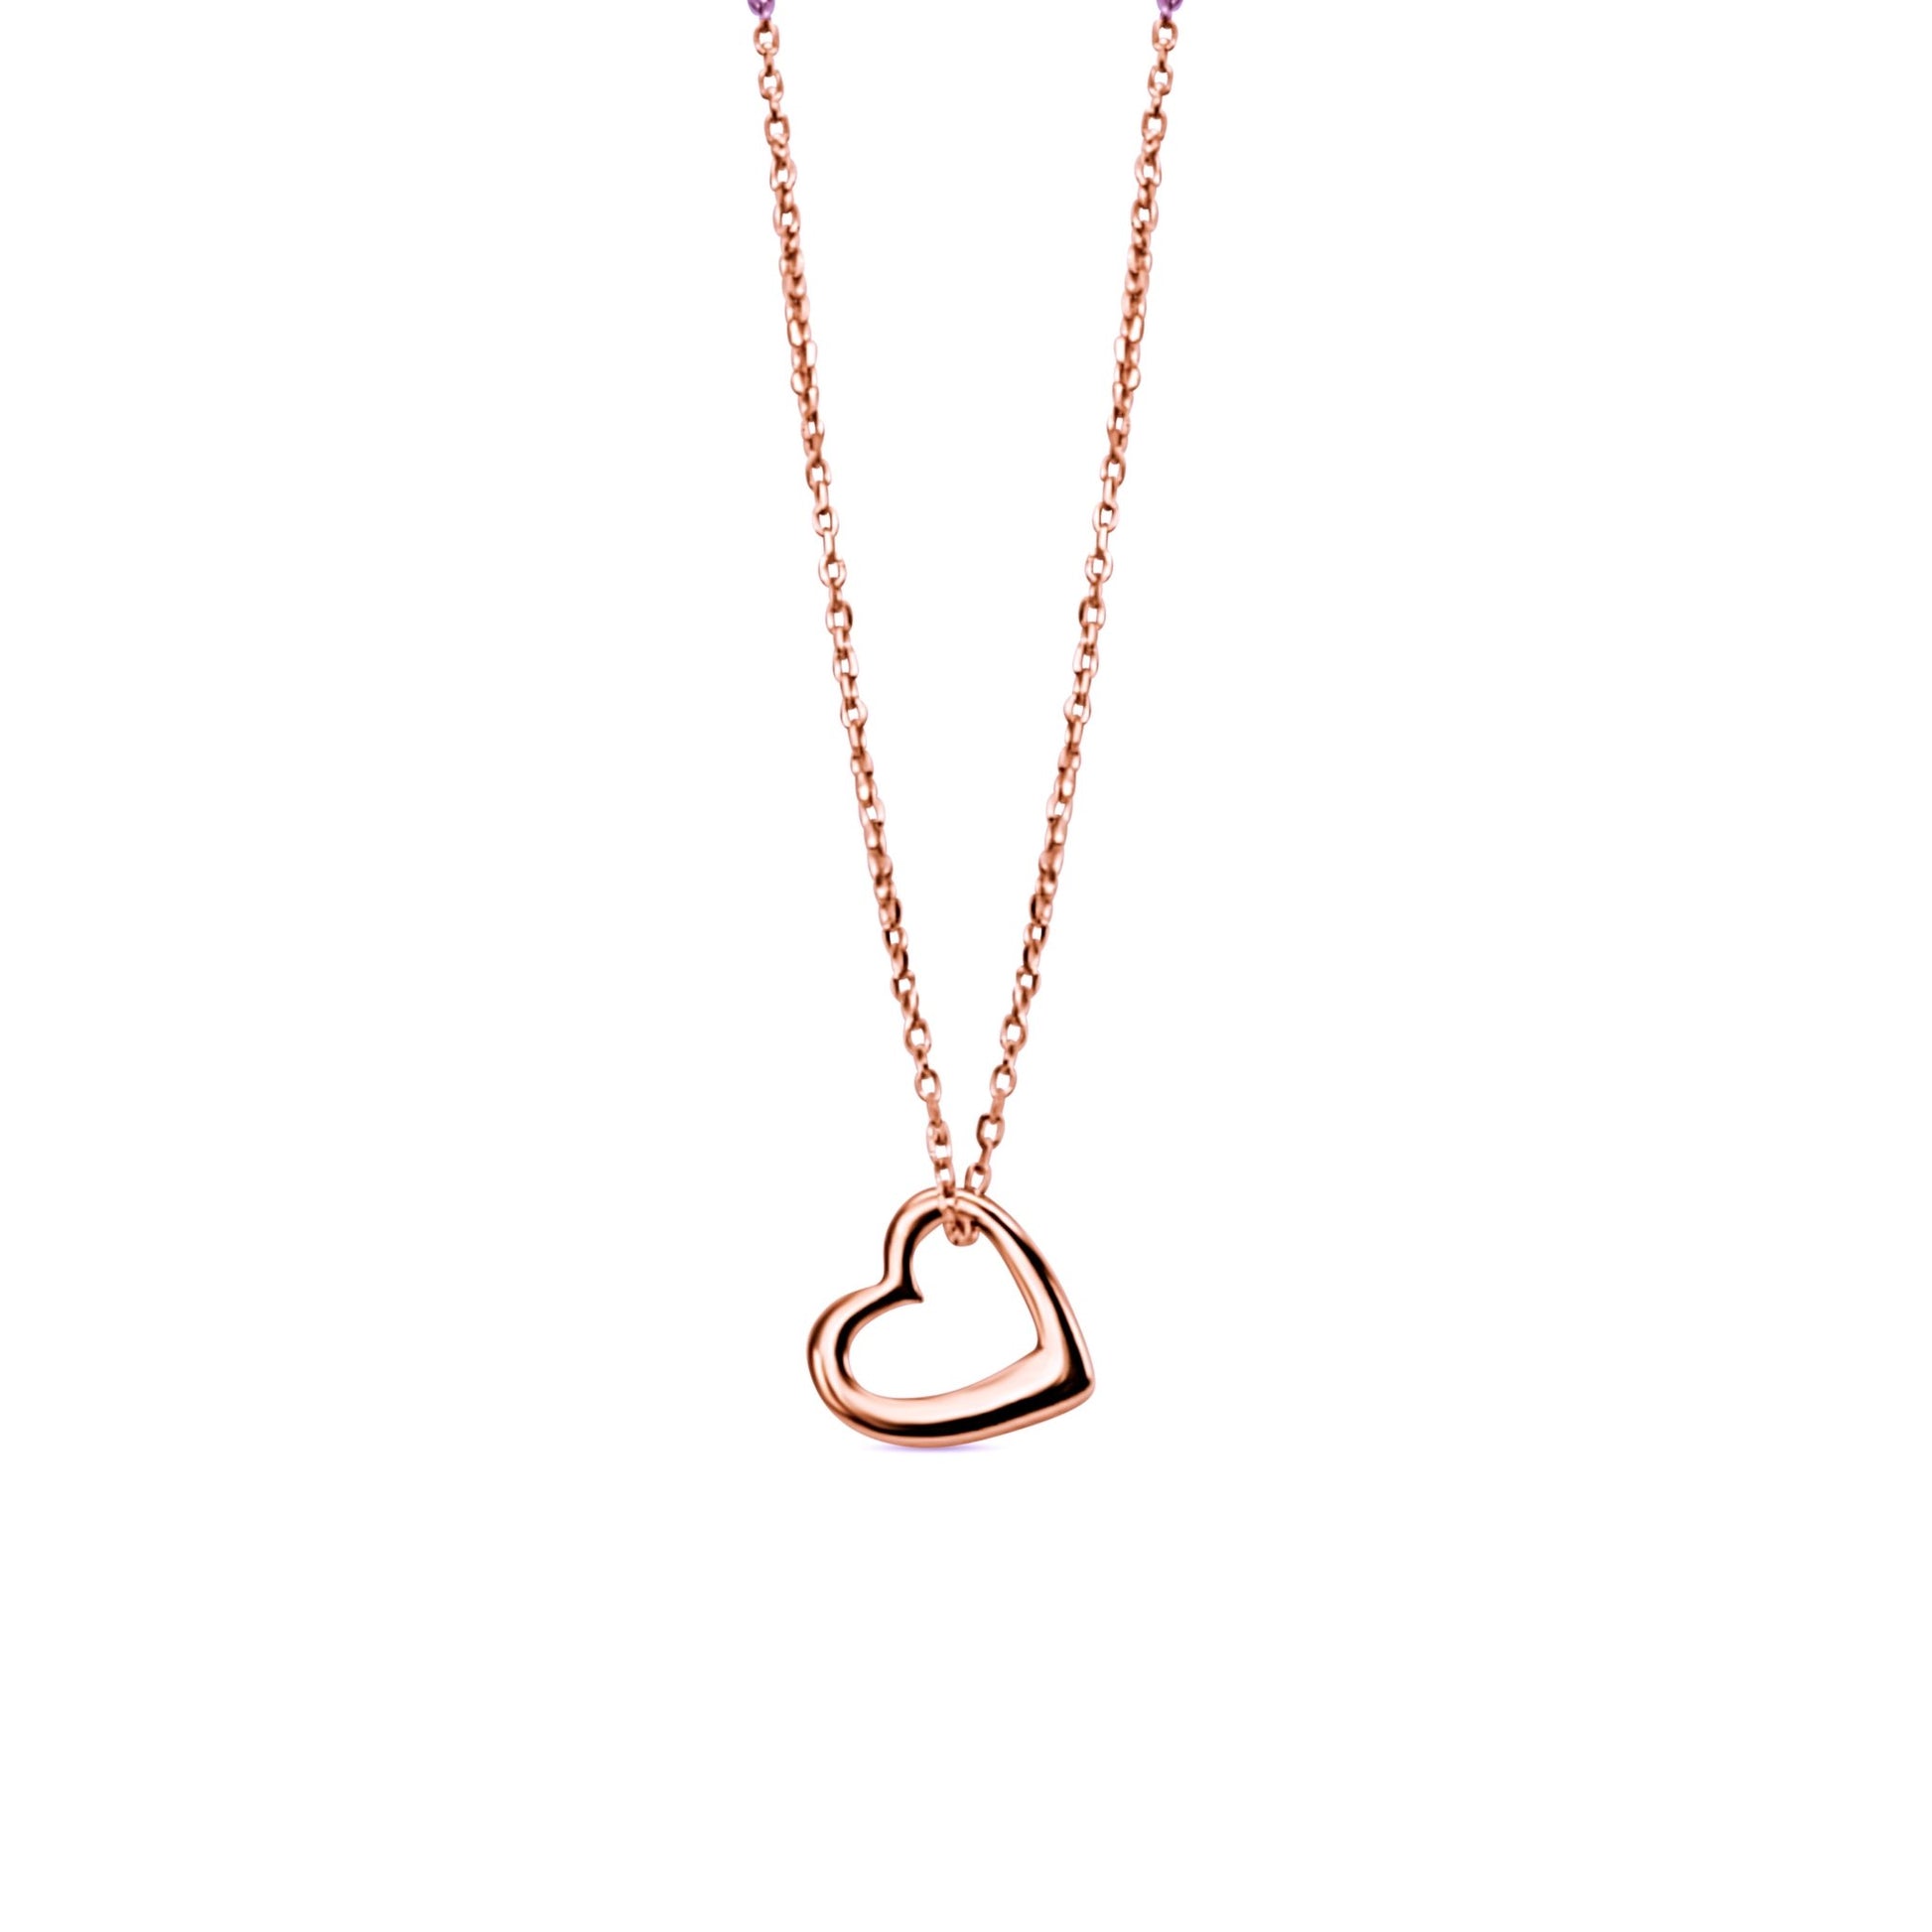 Amia Heart necklace in rose gold plated silver